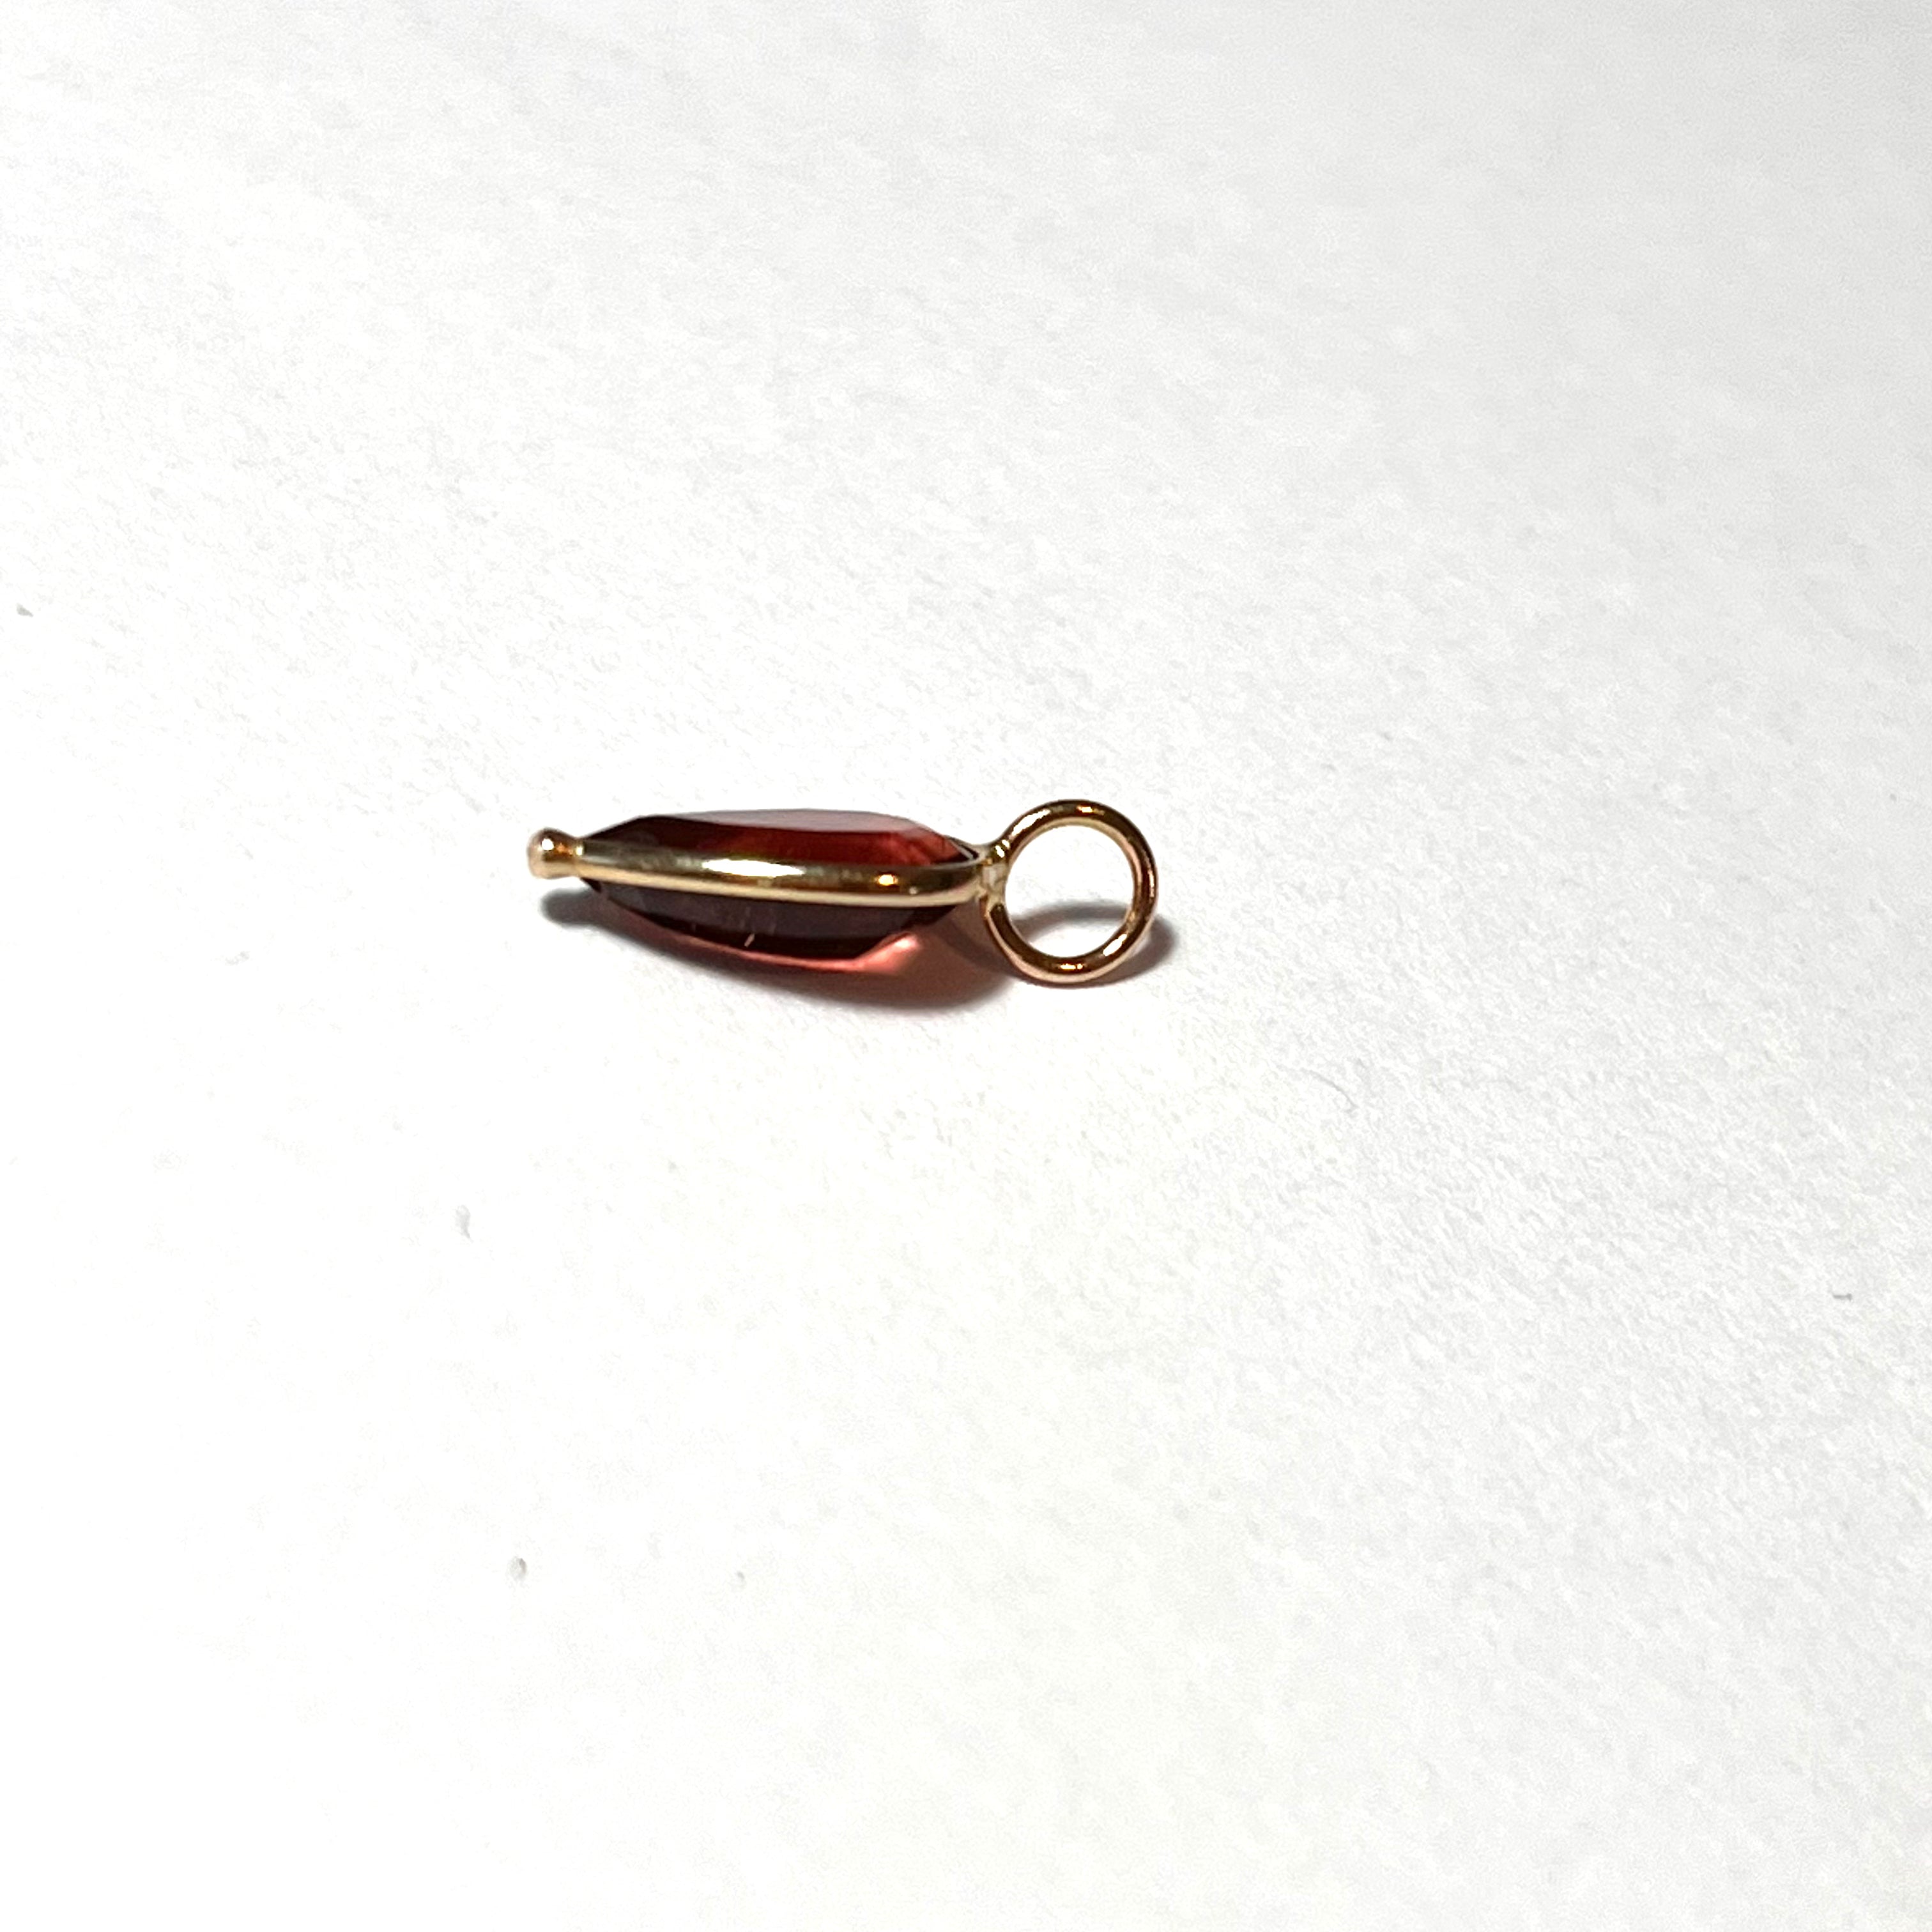 1.24ct Pear Shaped Red Garnet Solid 14K Yellow Gold Charm Pendant 16x6mm